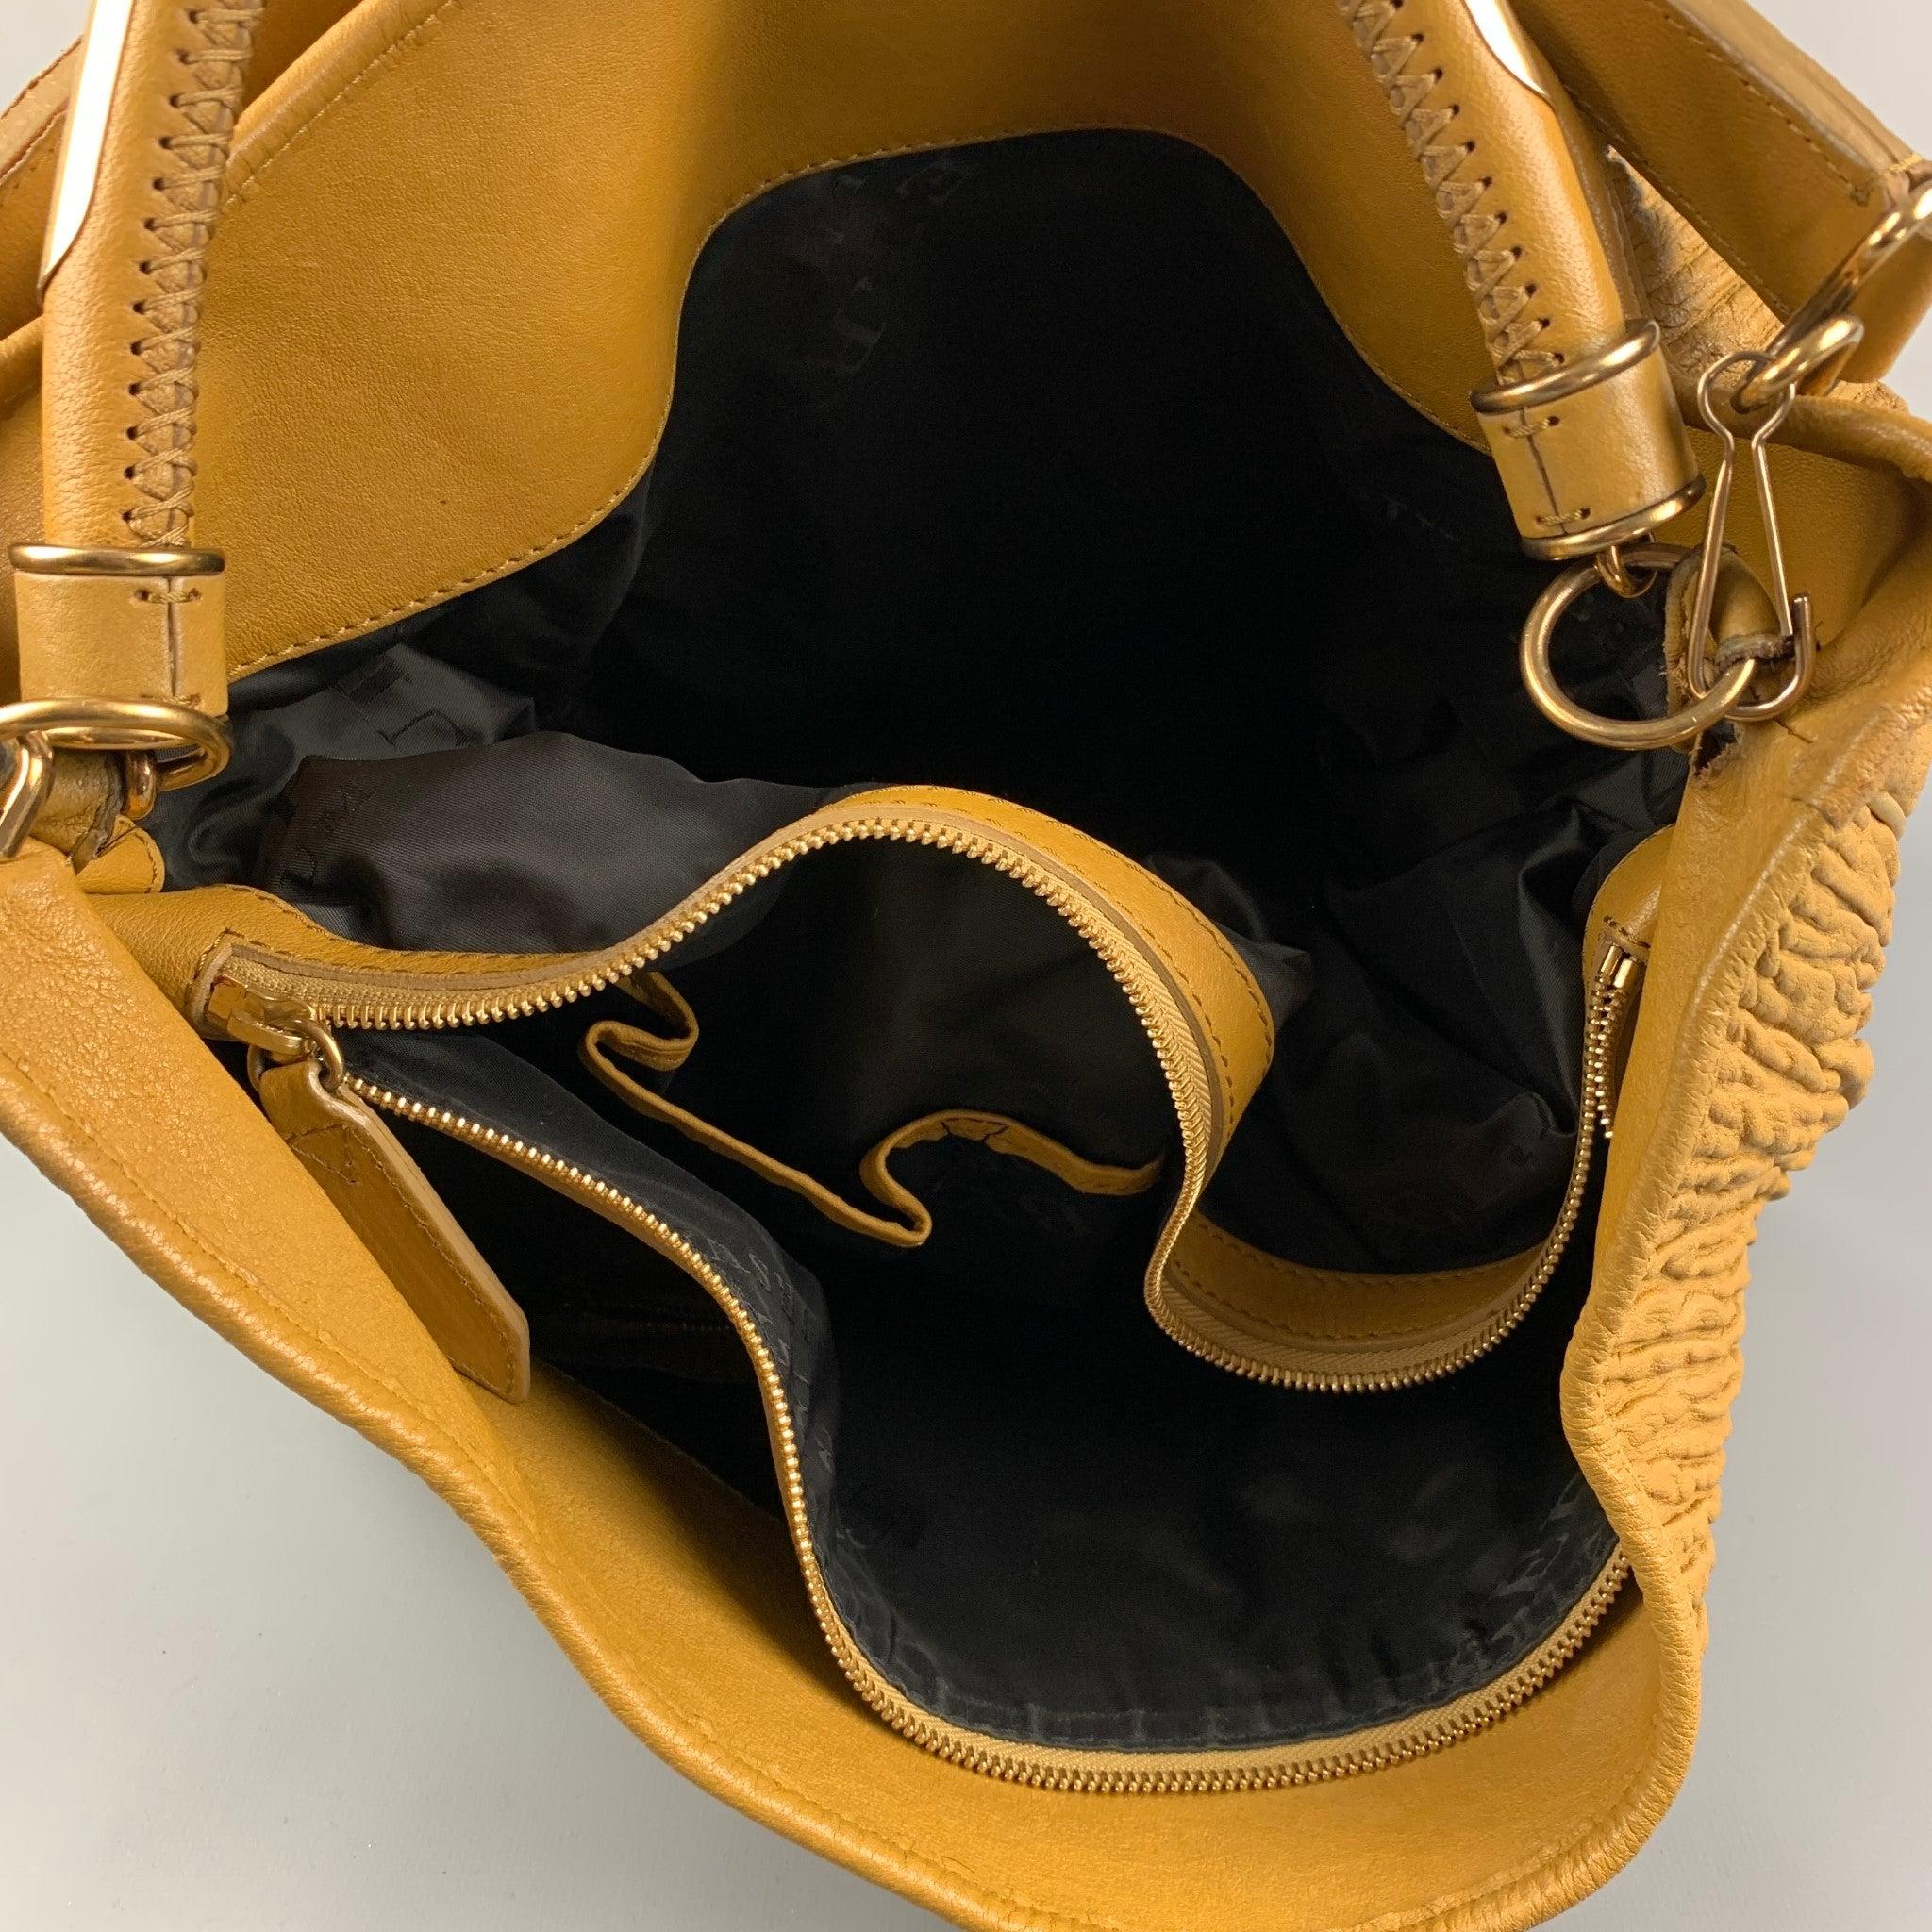 BURBERRY PRORSUM Mustard Ruched Leather Tote Handbag For Sale 1